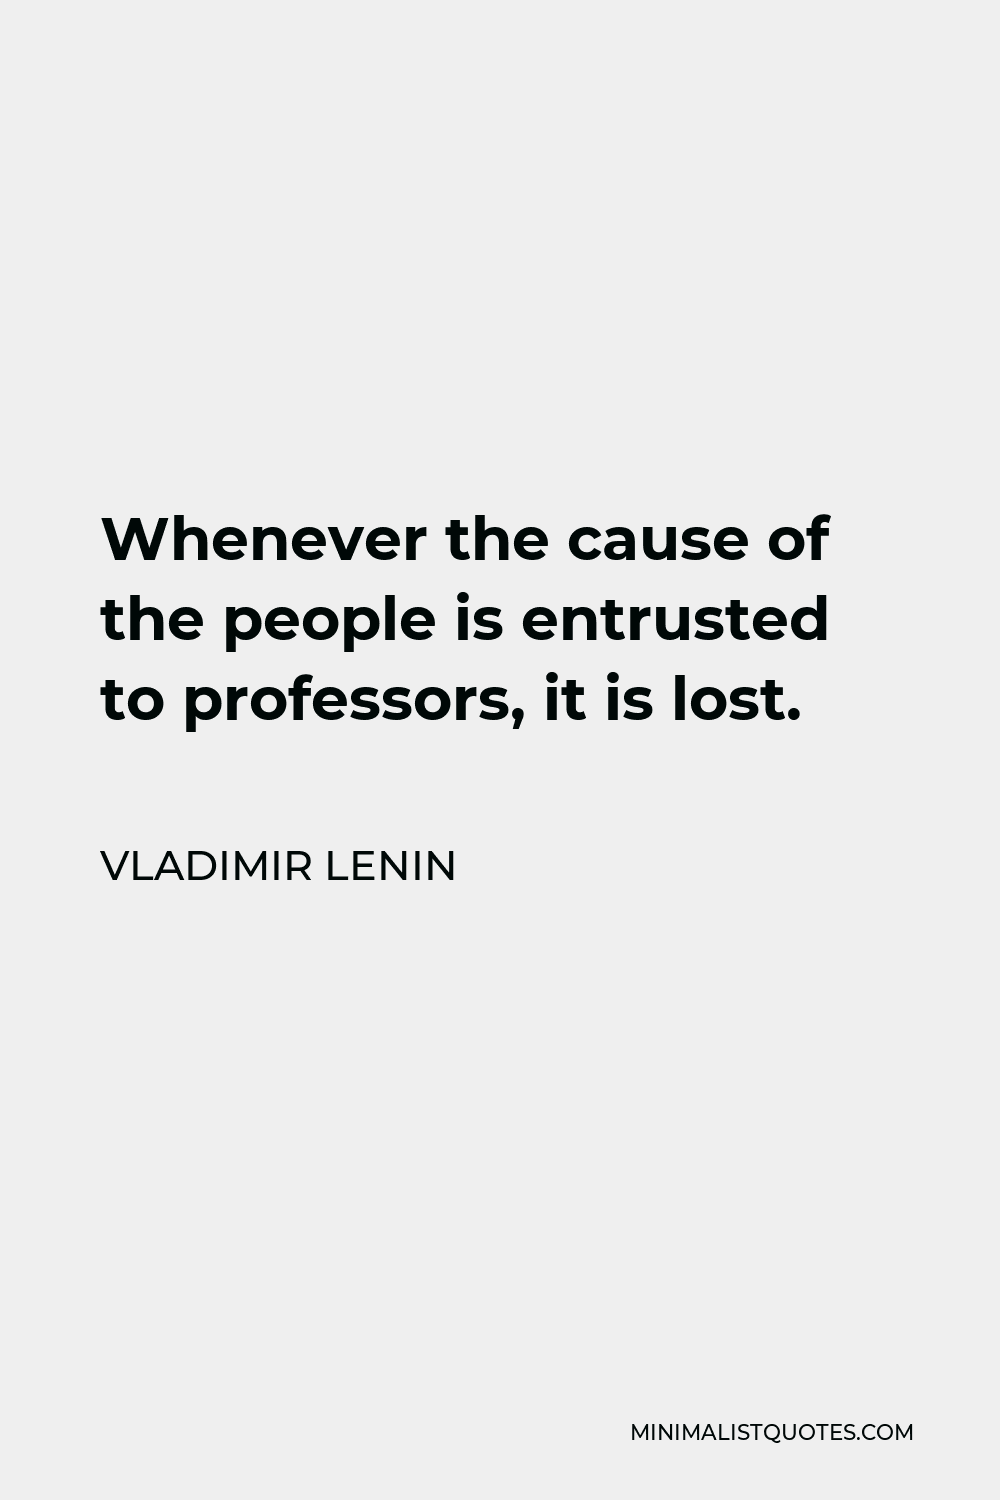 Vladimir Lenin Quote - Whenever the cause of the people is entrusted to professors, it is lost.